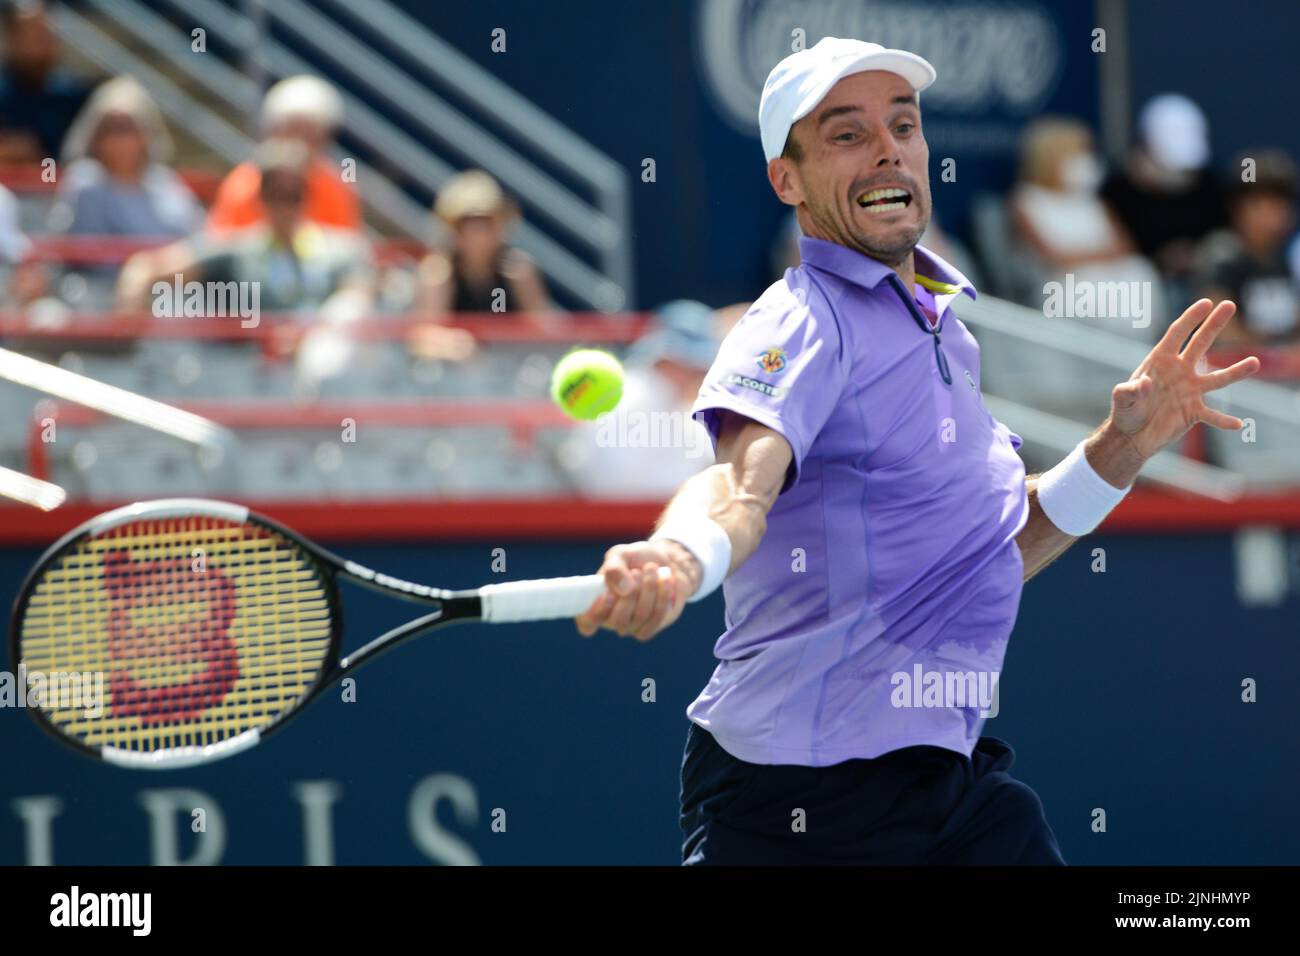 Montreal, Quebec, Canada. 11th Aug, 2022. ROBERTO BAUTISTA AGUT of Spain in  his third round match in the National Bank Open tennis tournament in  Montreal Canada. (Credit Image: © Christopher Levy/ZUMA Press